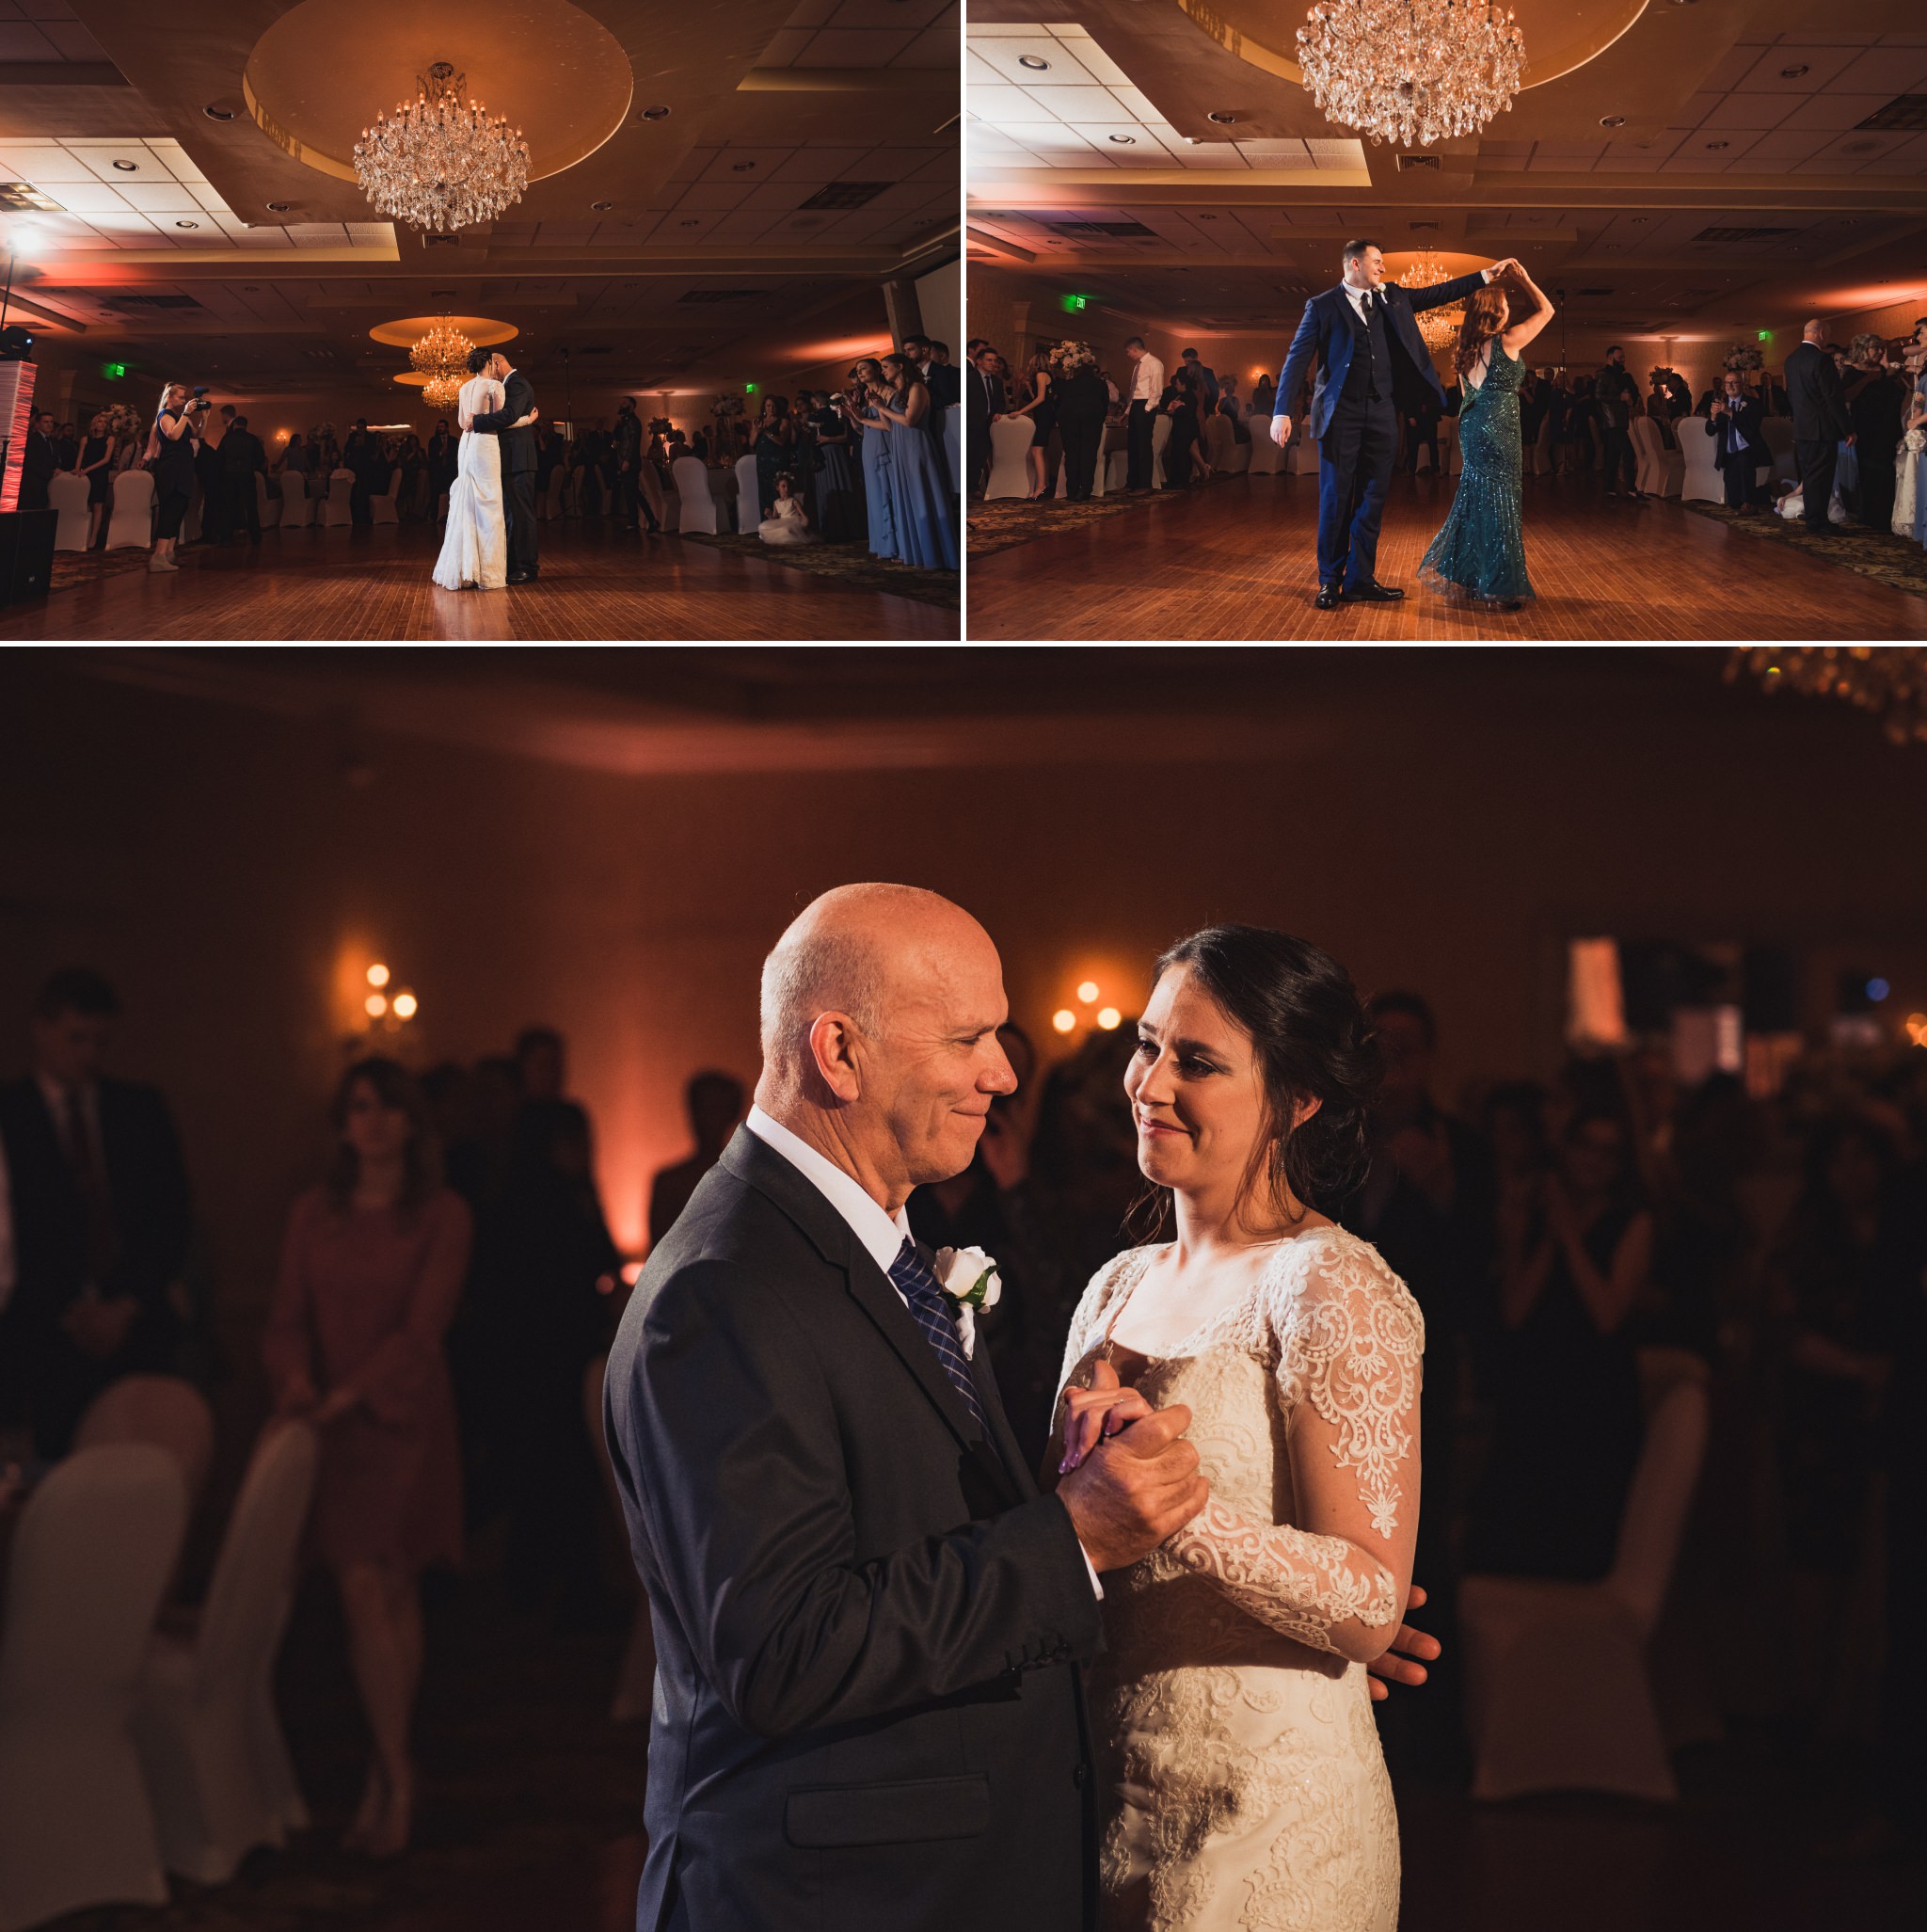  Photos taken during Luke and Kelly's wedding in New Jersey. photographed with a photojournalistic style and with story telling in mind.  